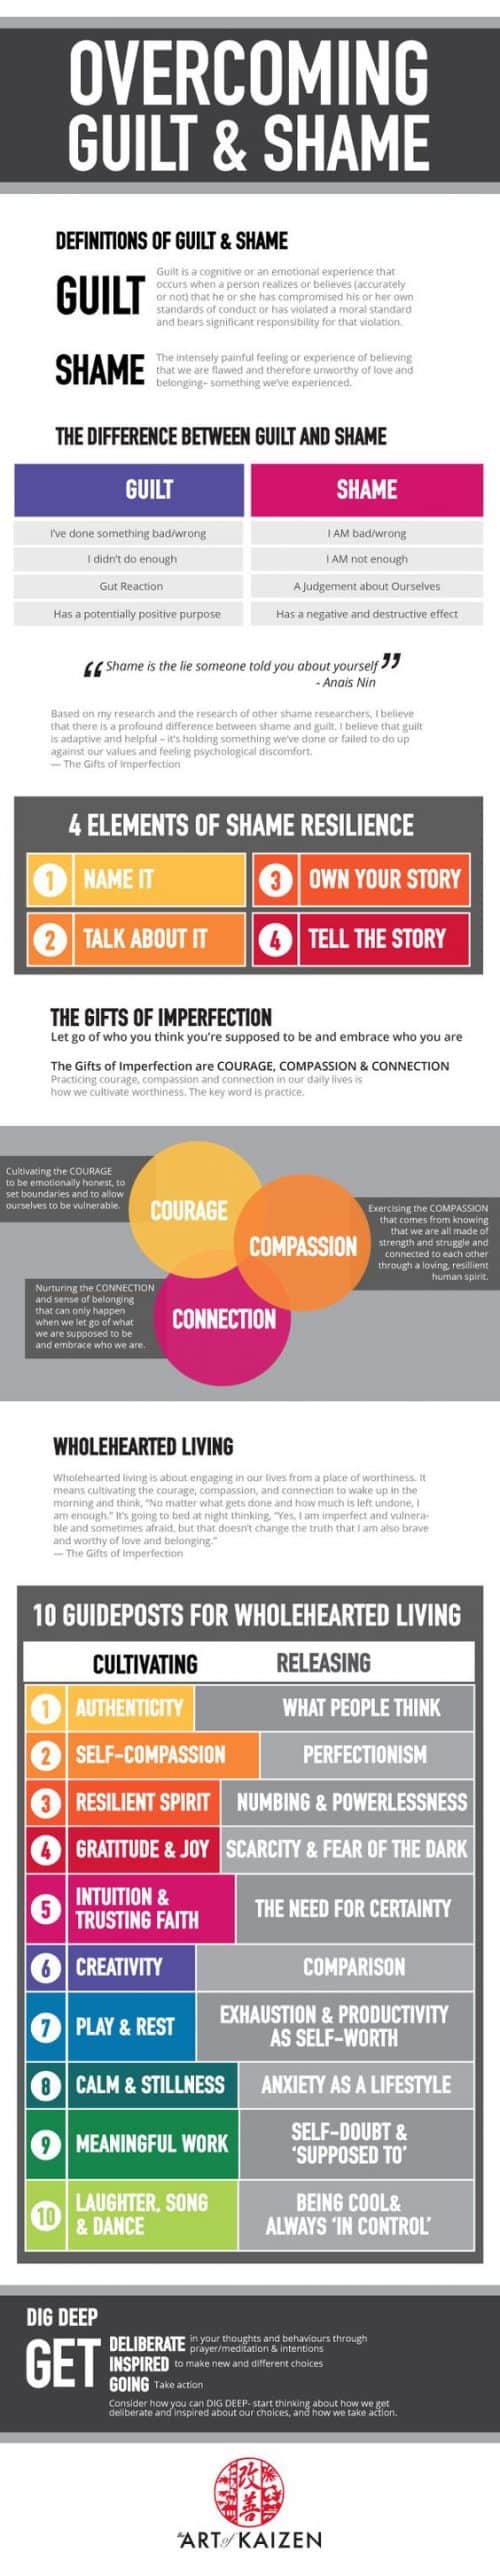 overcoming guilt and shame infographic